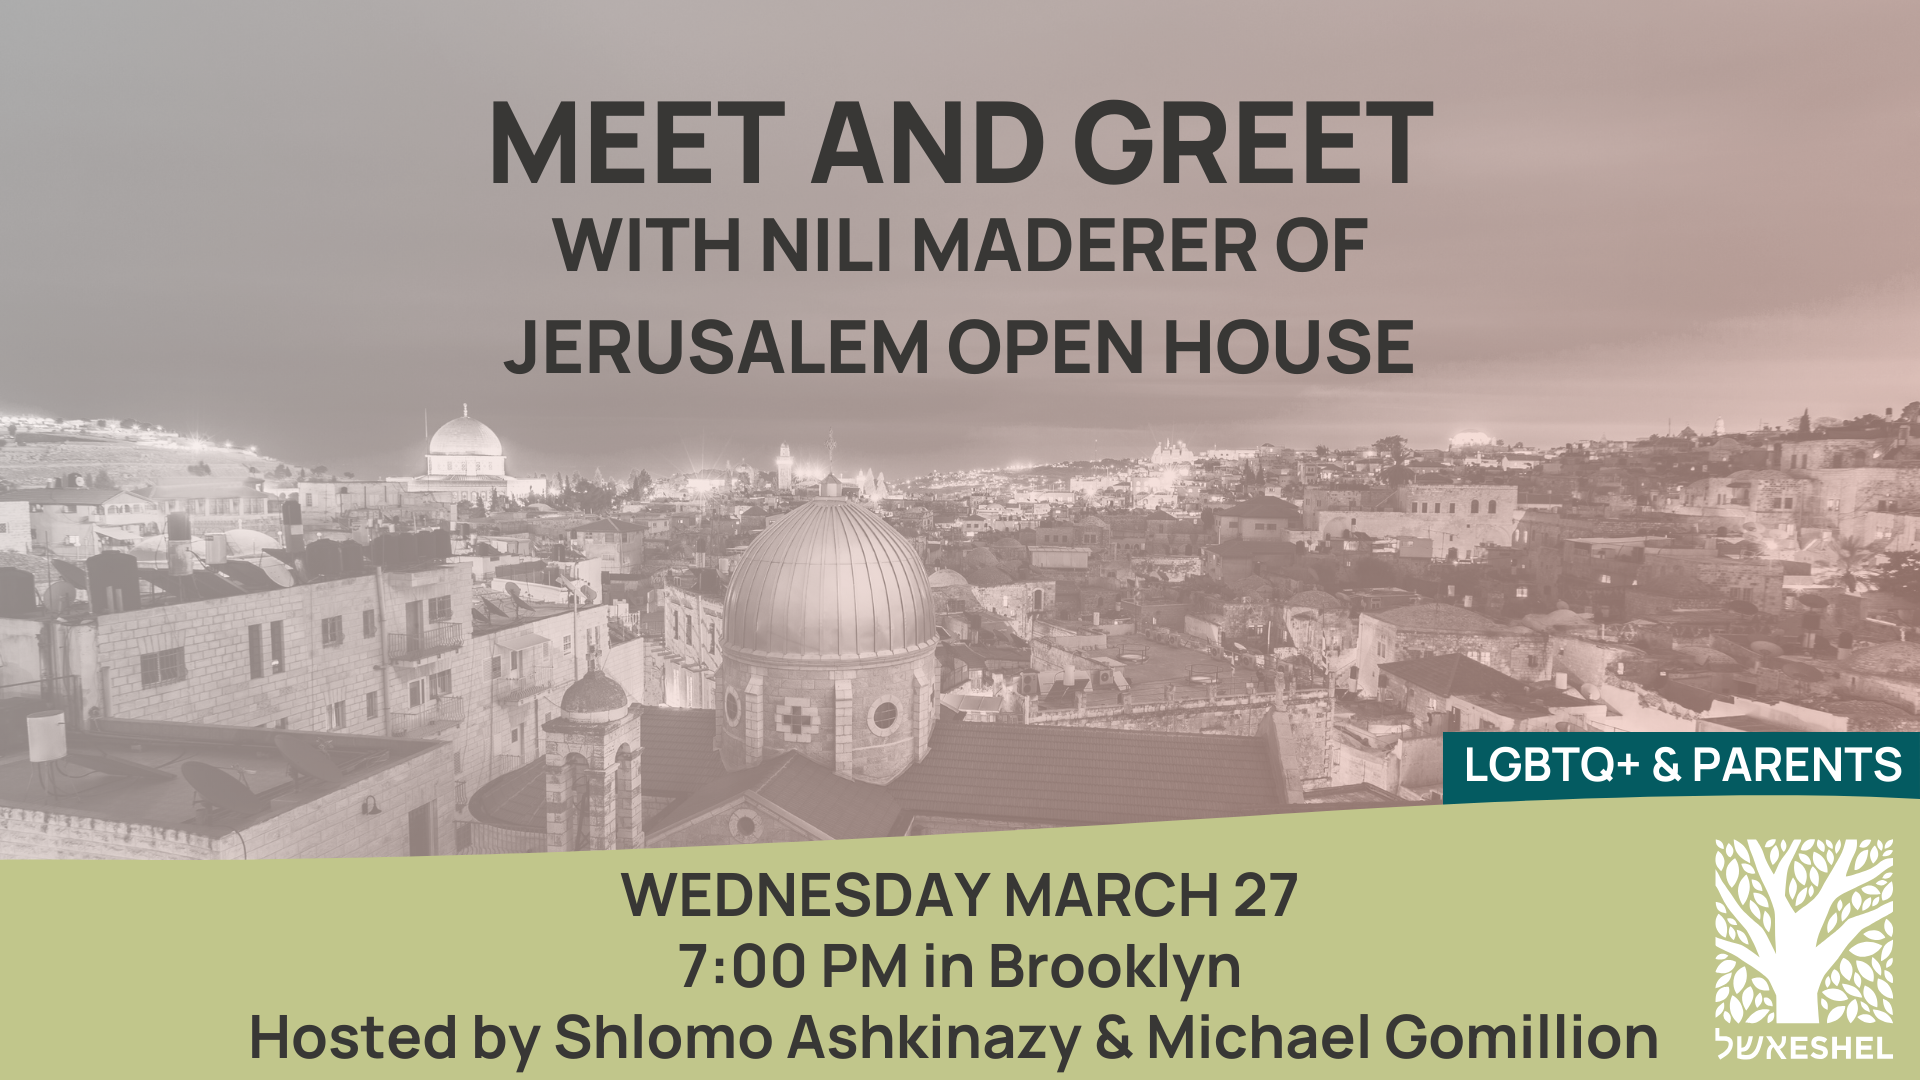 Meet and Greet with Nili Maderer of Jerusalem Open House | Wednesday March 27, 7:00 pm in Brooklyn, Hosted by Shlomo Ashkinazy & Michael Gomillion